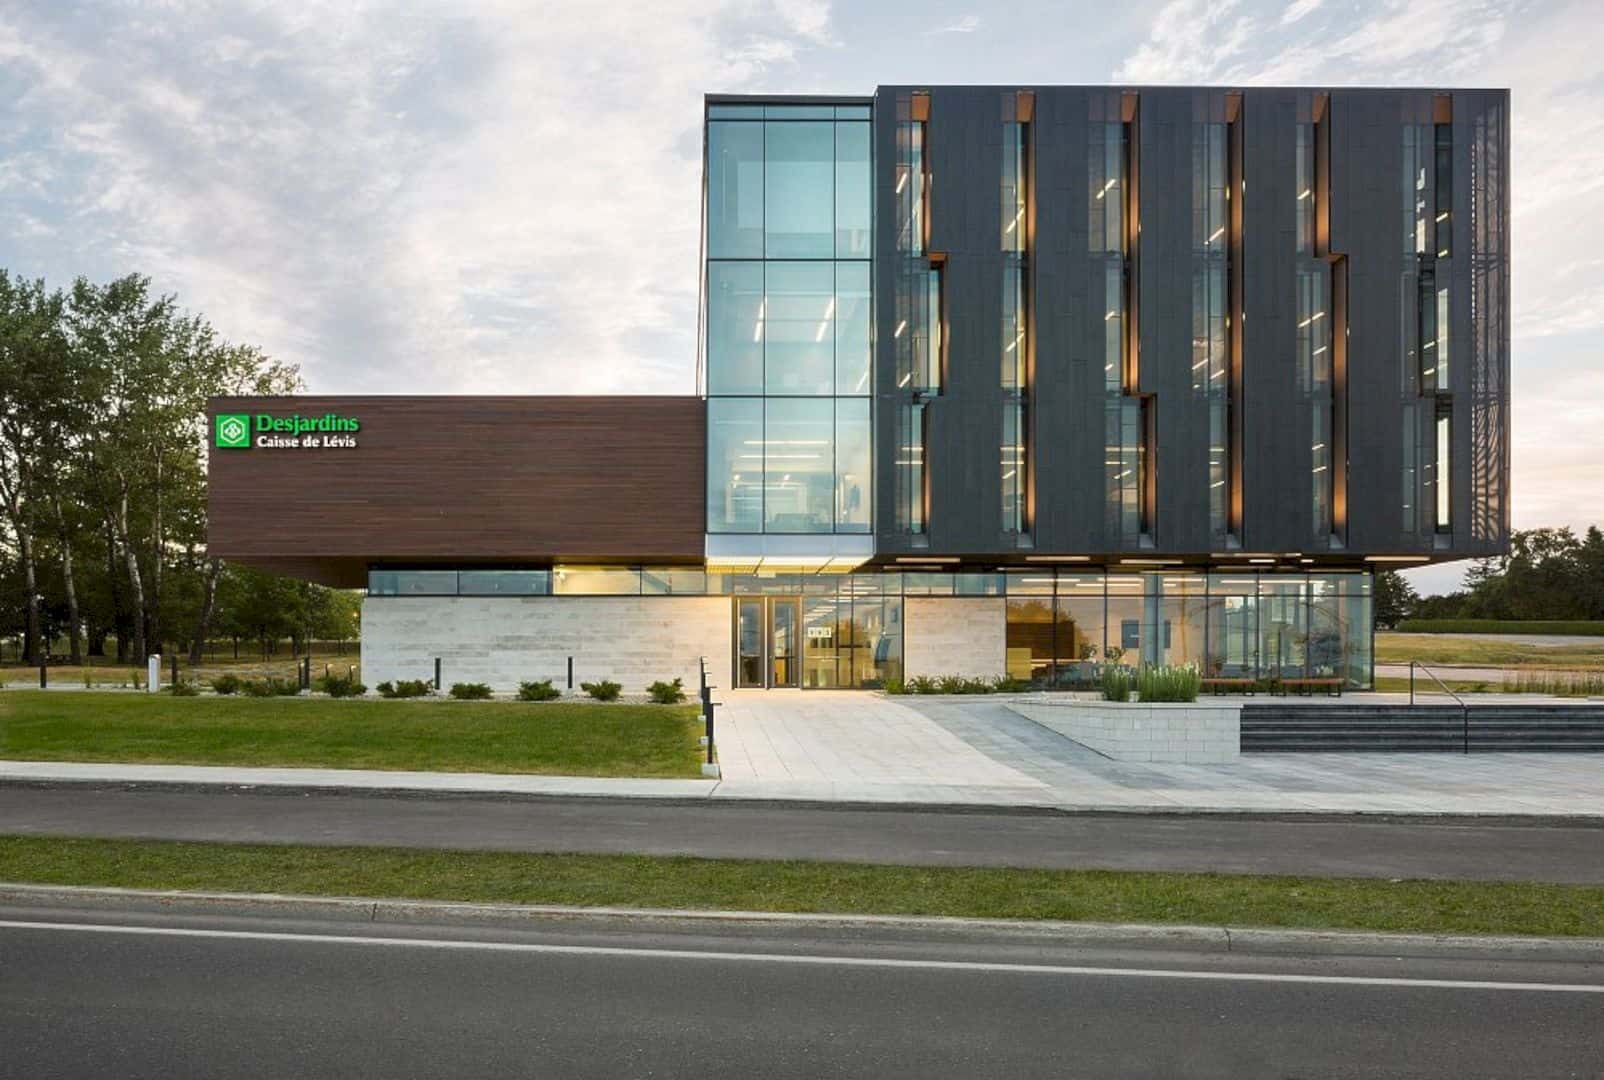 Desjardins Group Headquarters An Architectural Approach Combining Historical Value And Modernism Of Desjardins 11